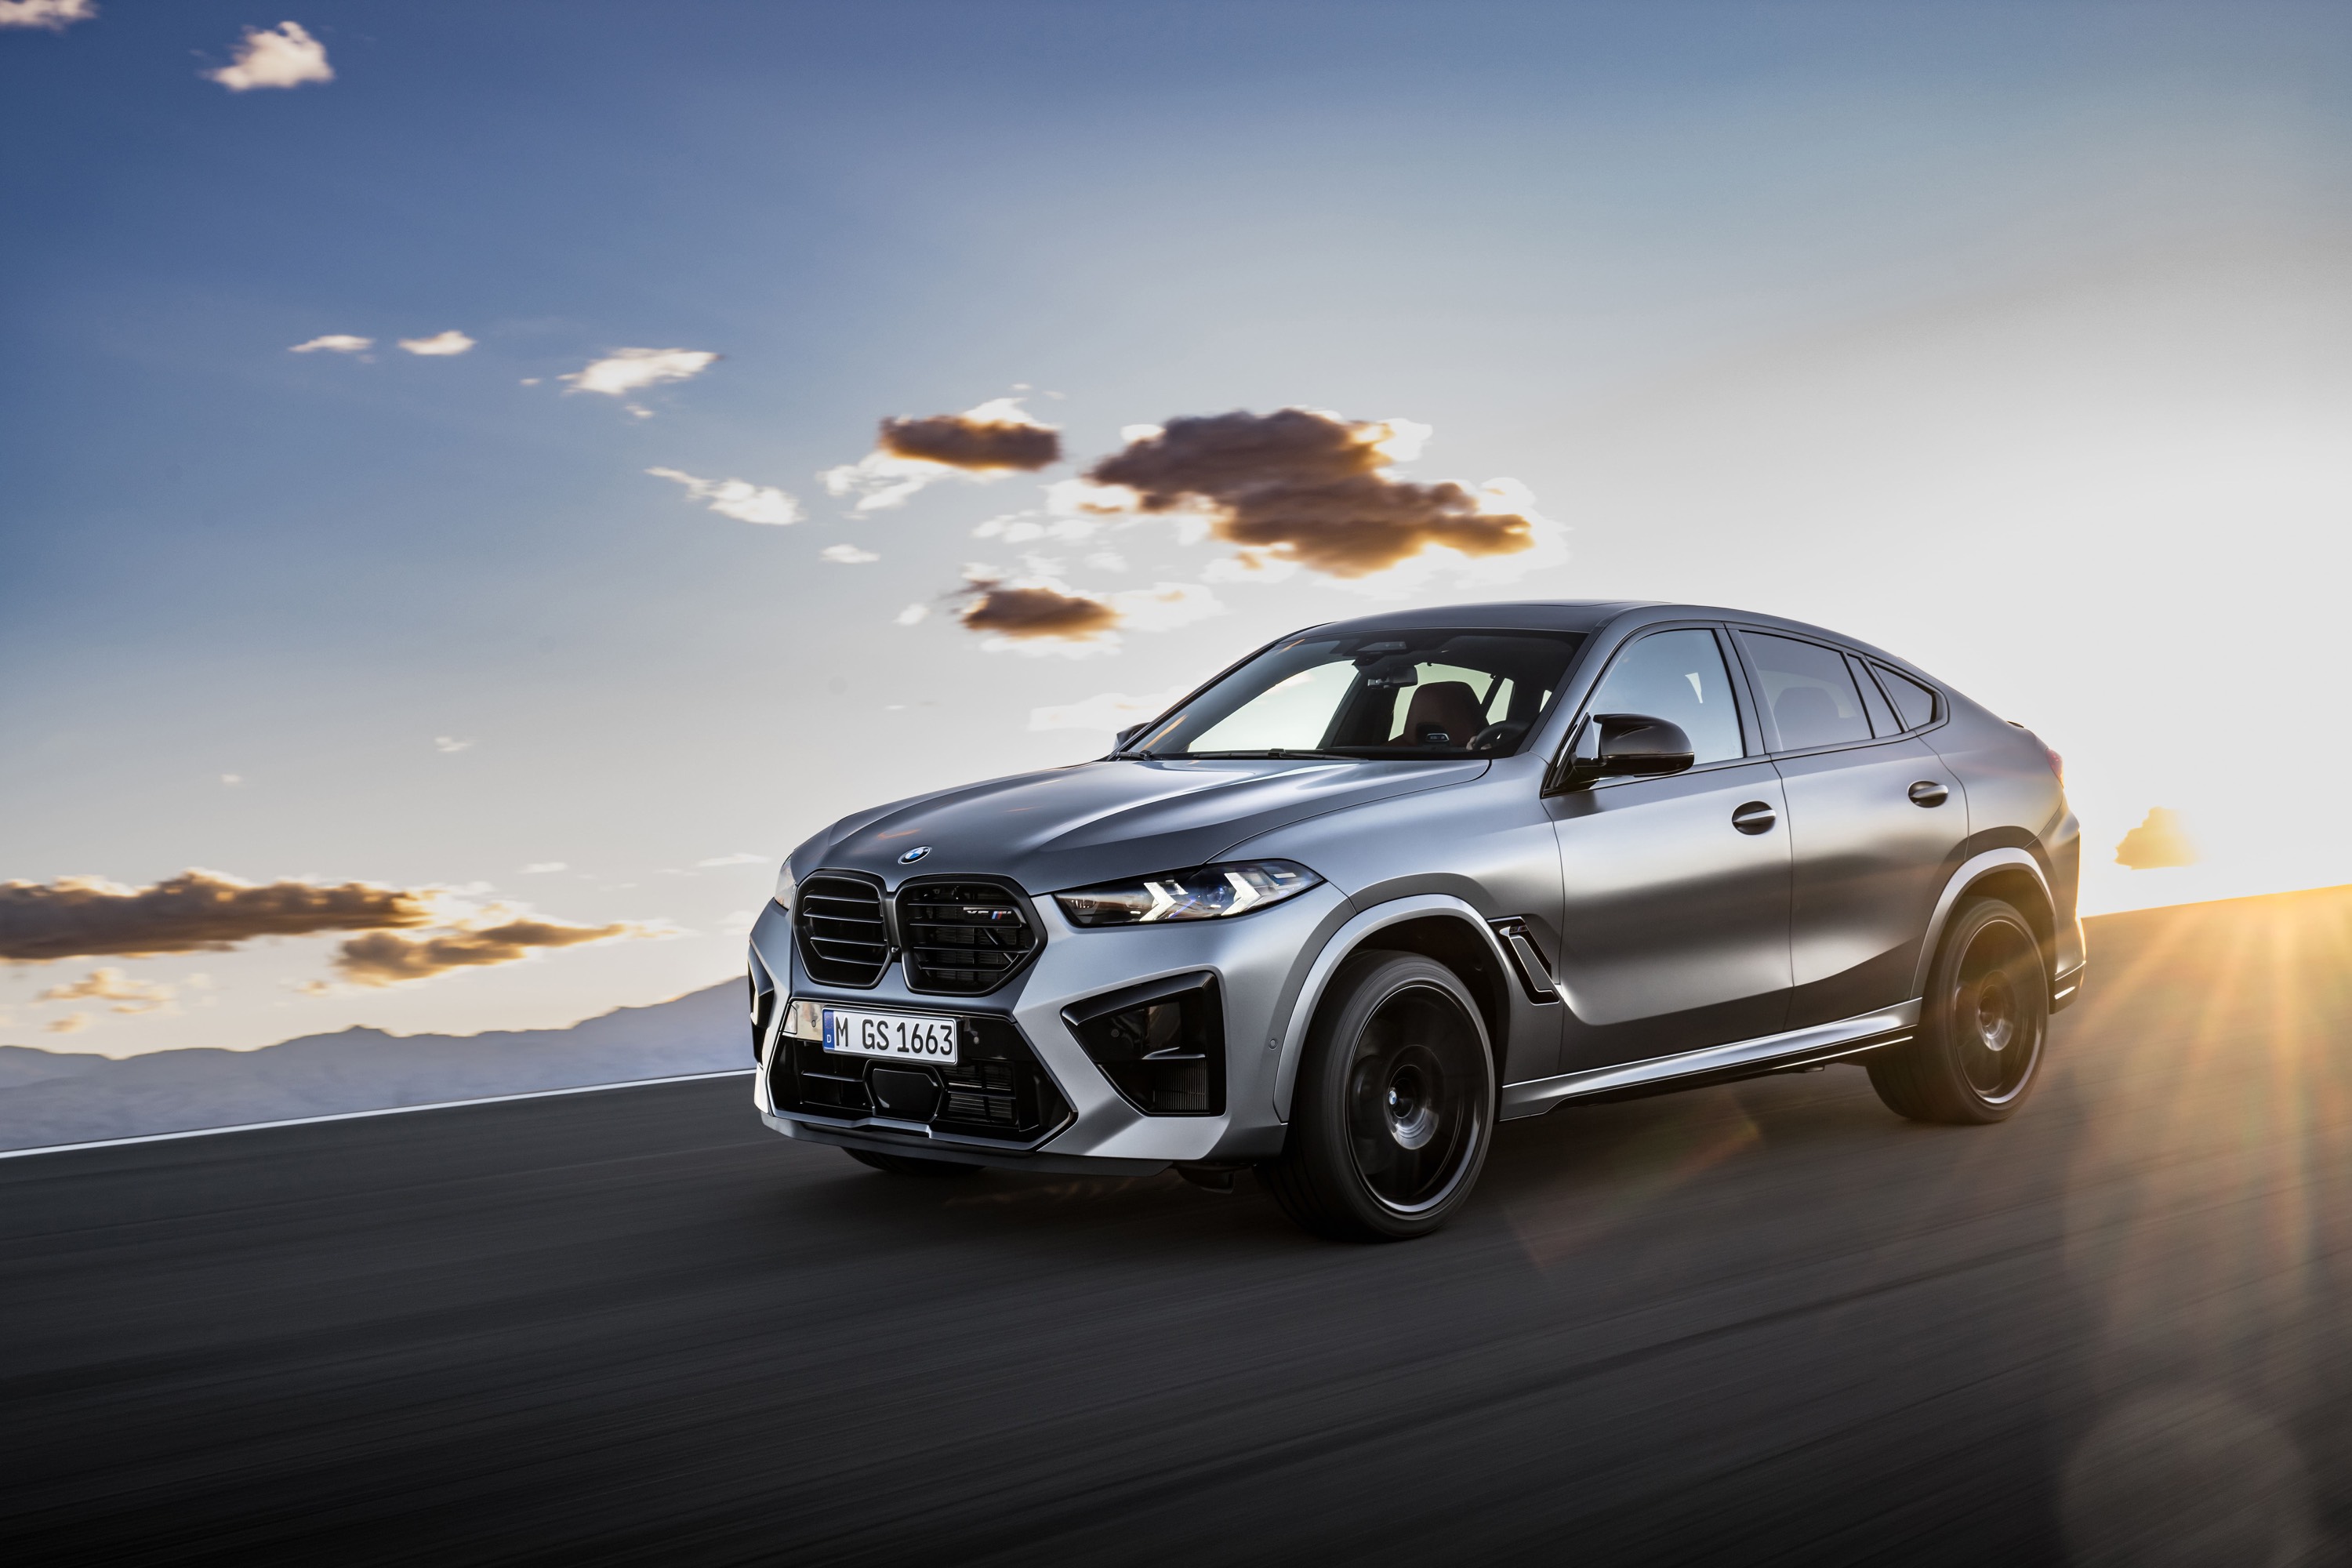 BMW X6 M Competition